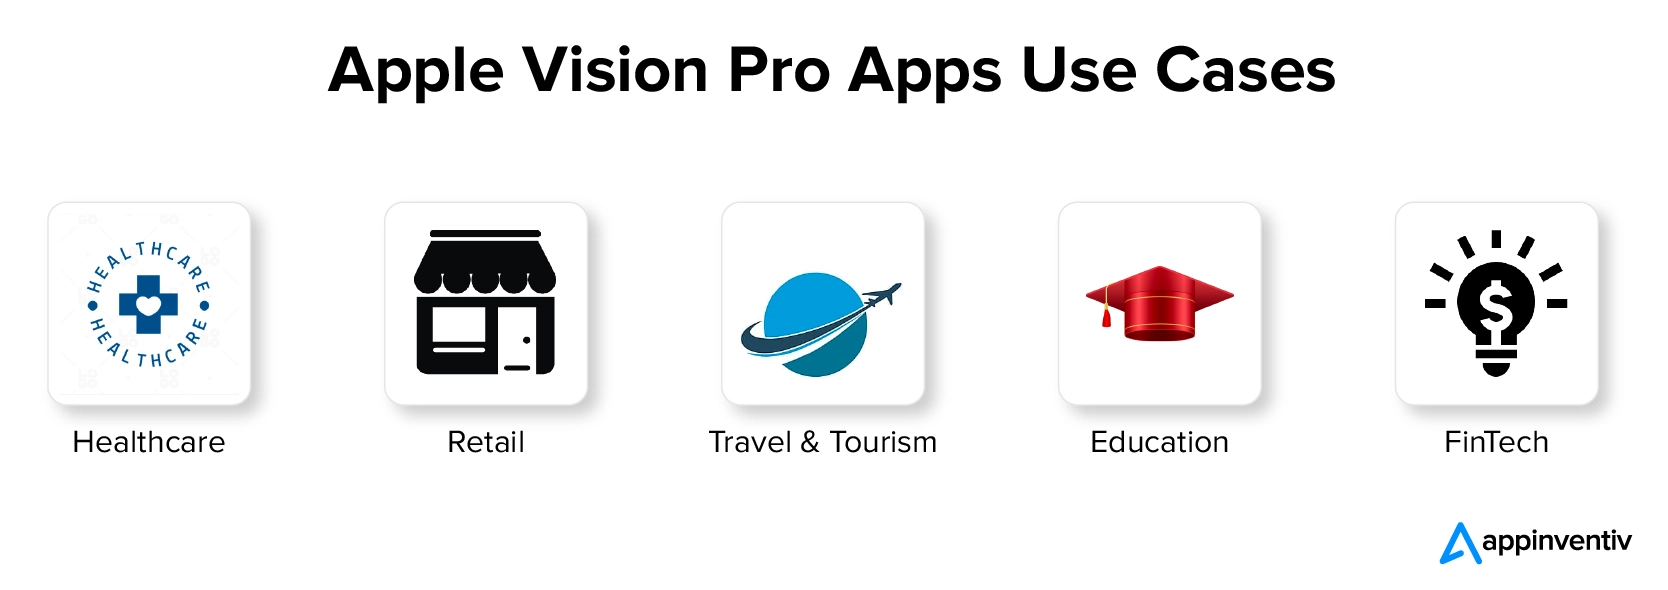 Emerging Use Cases of Apple Vision Pro Apps